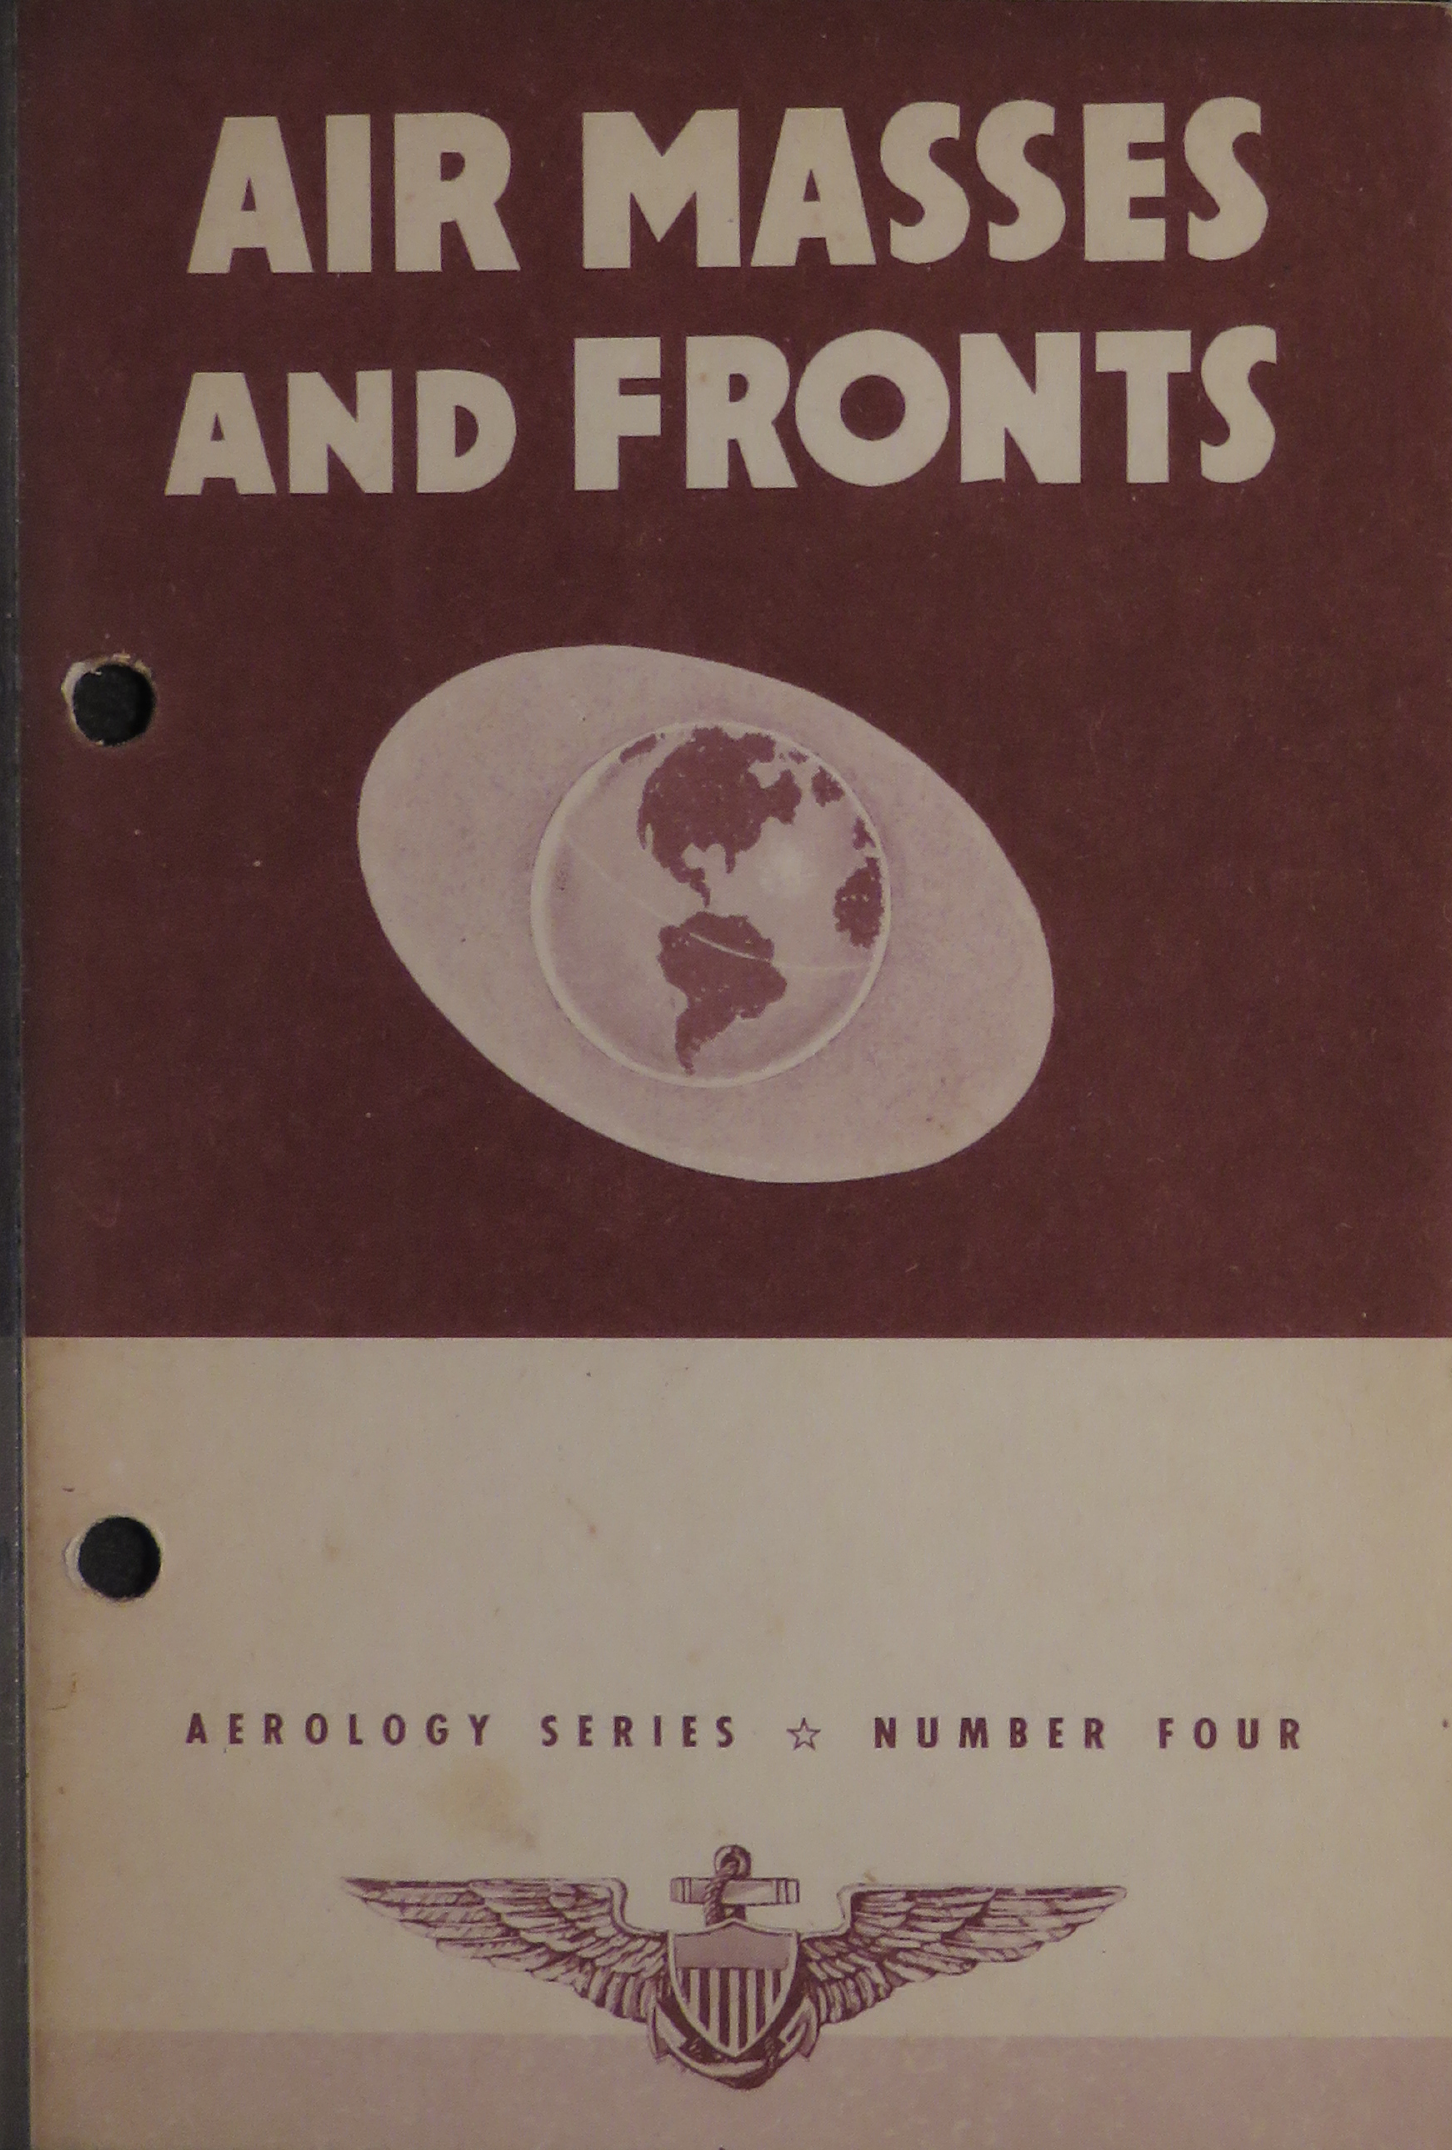 Sample page 1 from AirCorps Library document: Aerology Series No. 4; Air Masses and Fronts